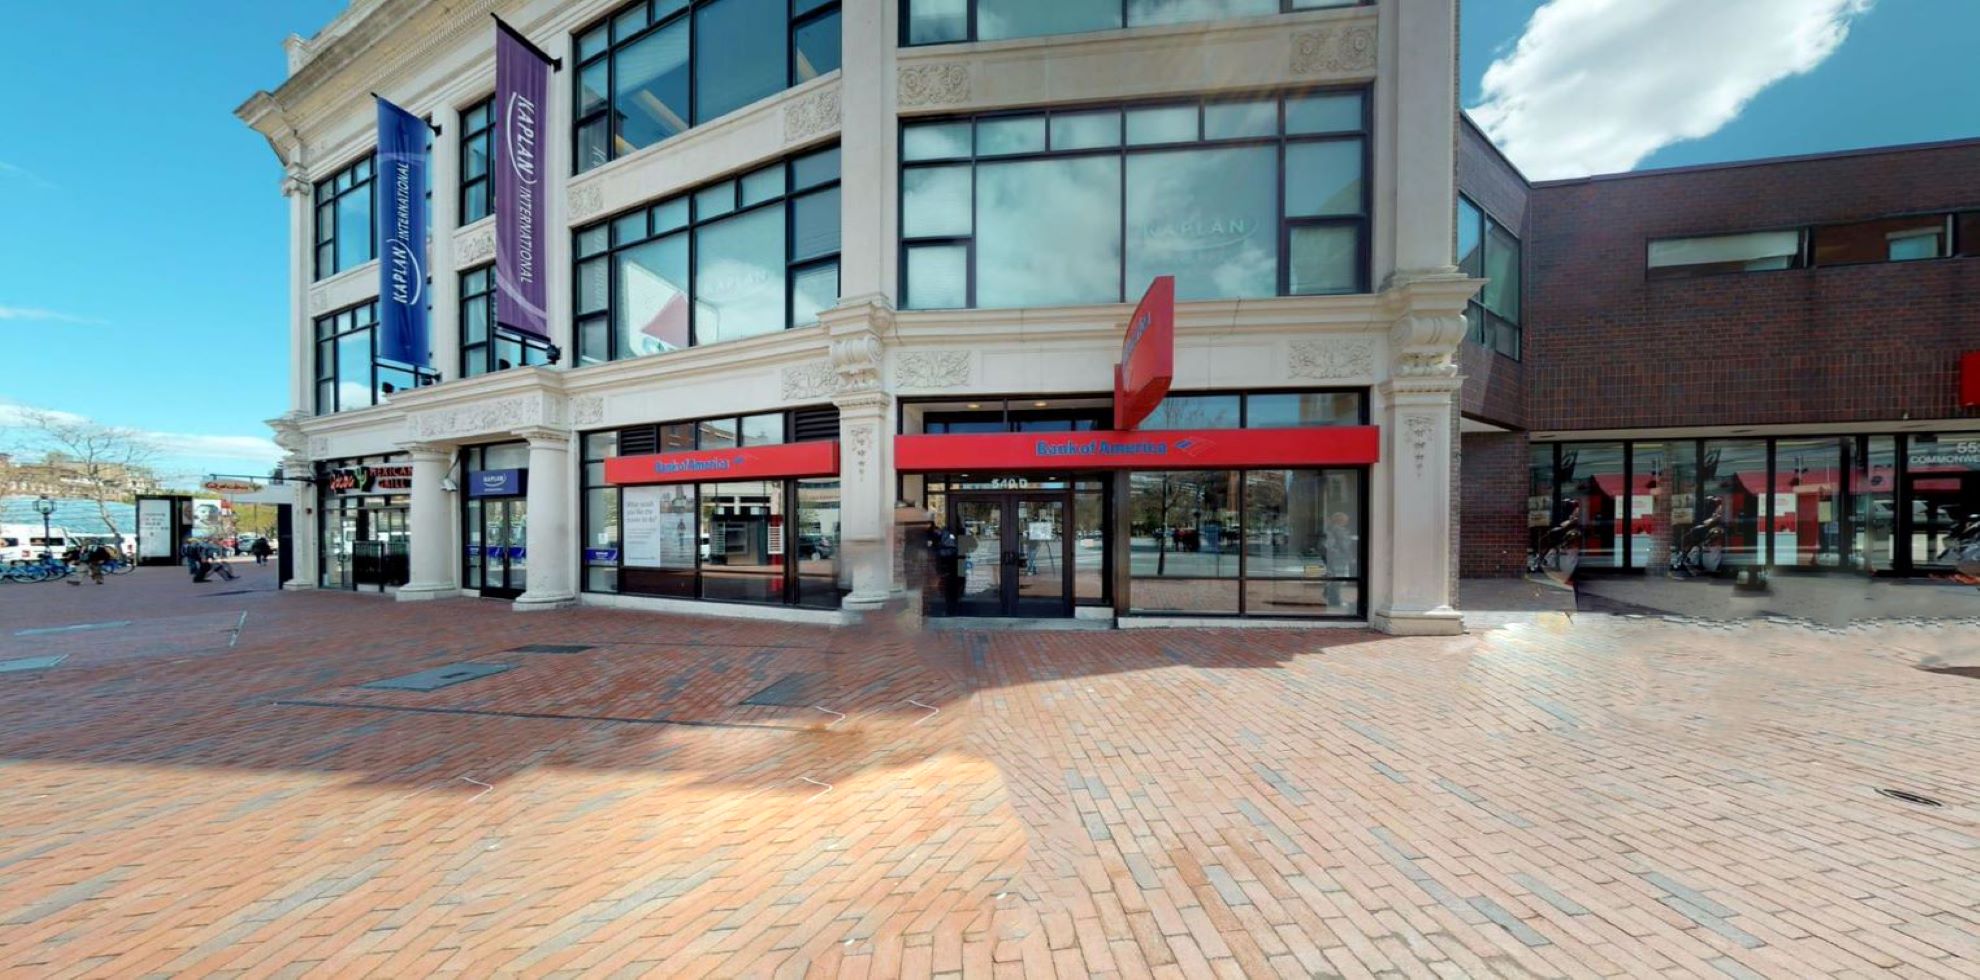 Bank of America financial center with walk-up ATM | 540 Commonwealth Ave, Boston, MA 02215